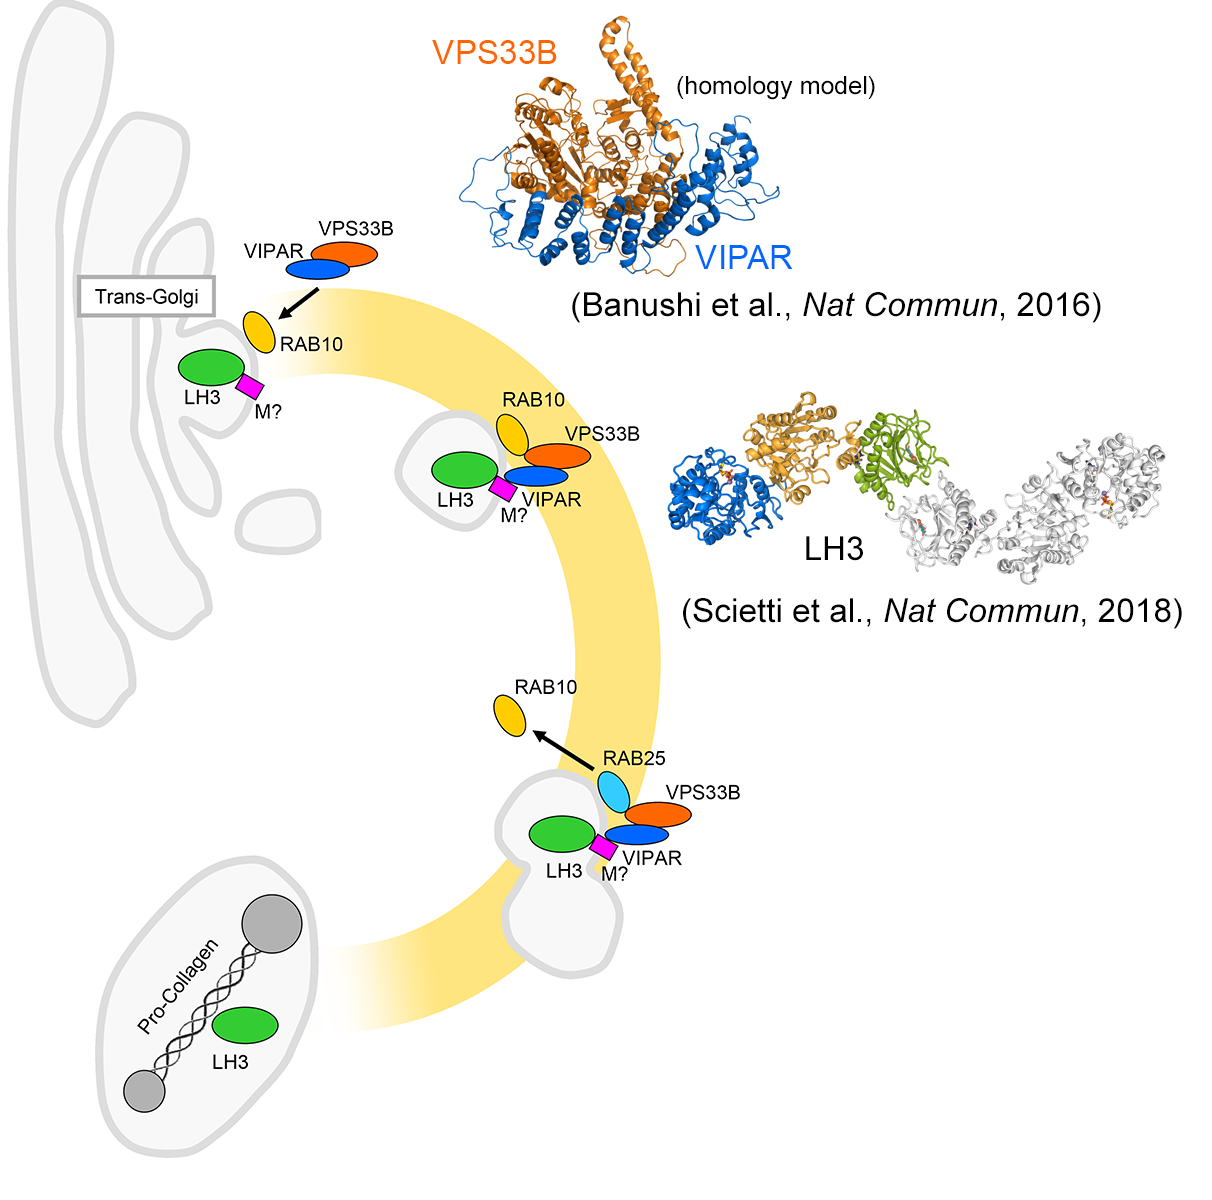 Schematic of the newly-discovered pathway targeting LH3 from the trans-Golgi Network to the newly described procollagen containing organelles is regulated by VIPAR and its interacting proteins.